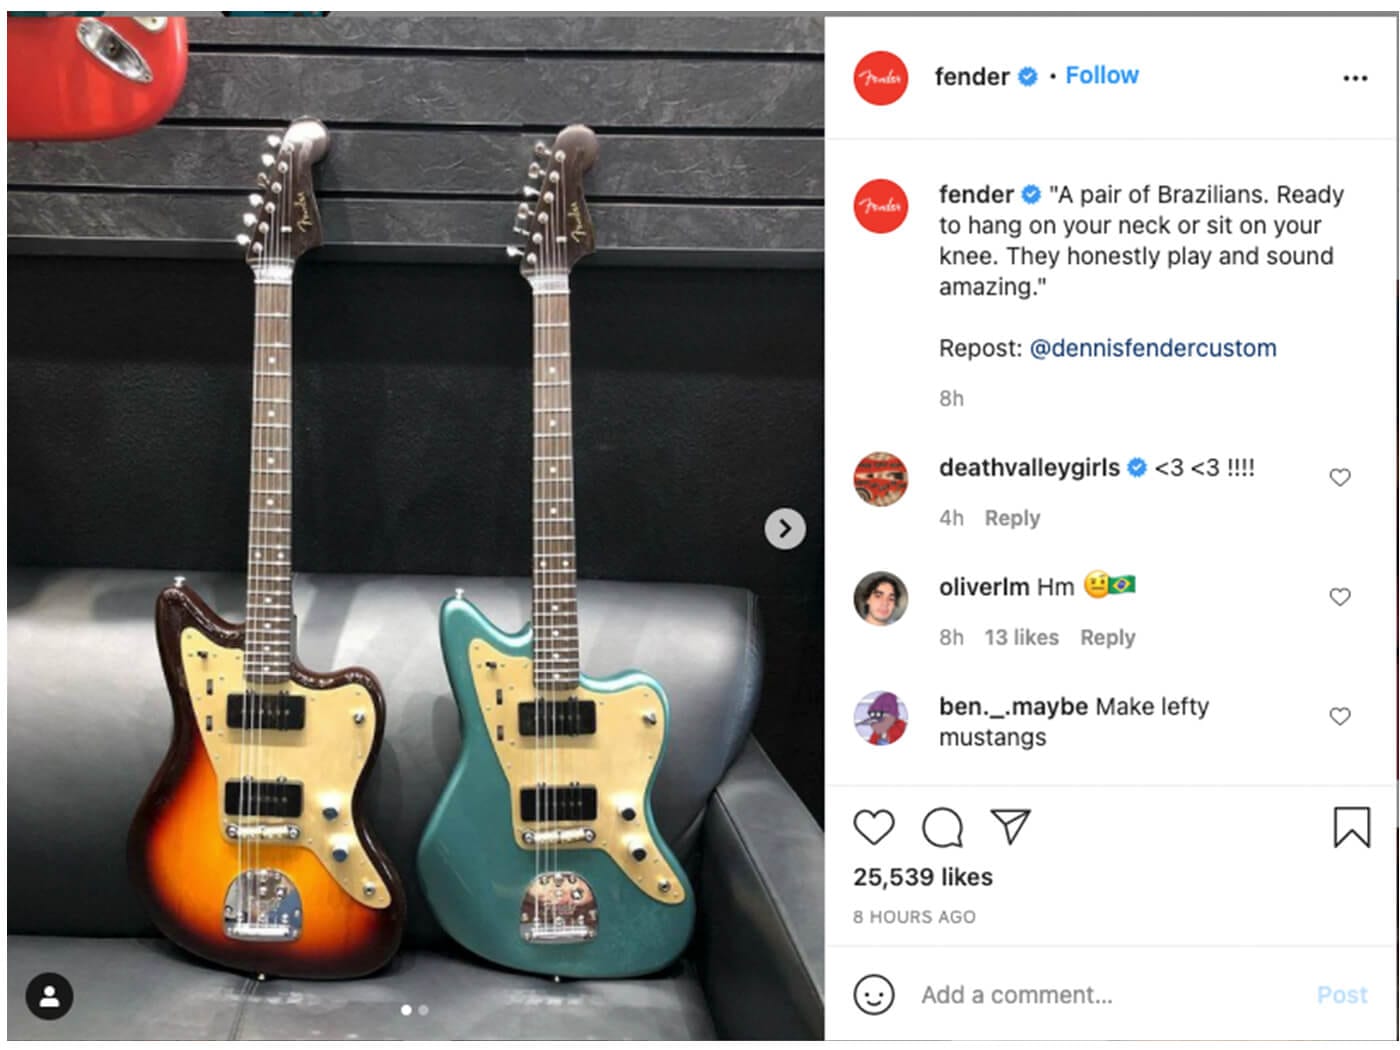 The now-removed Fender Instagram post